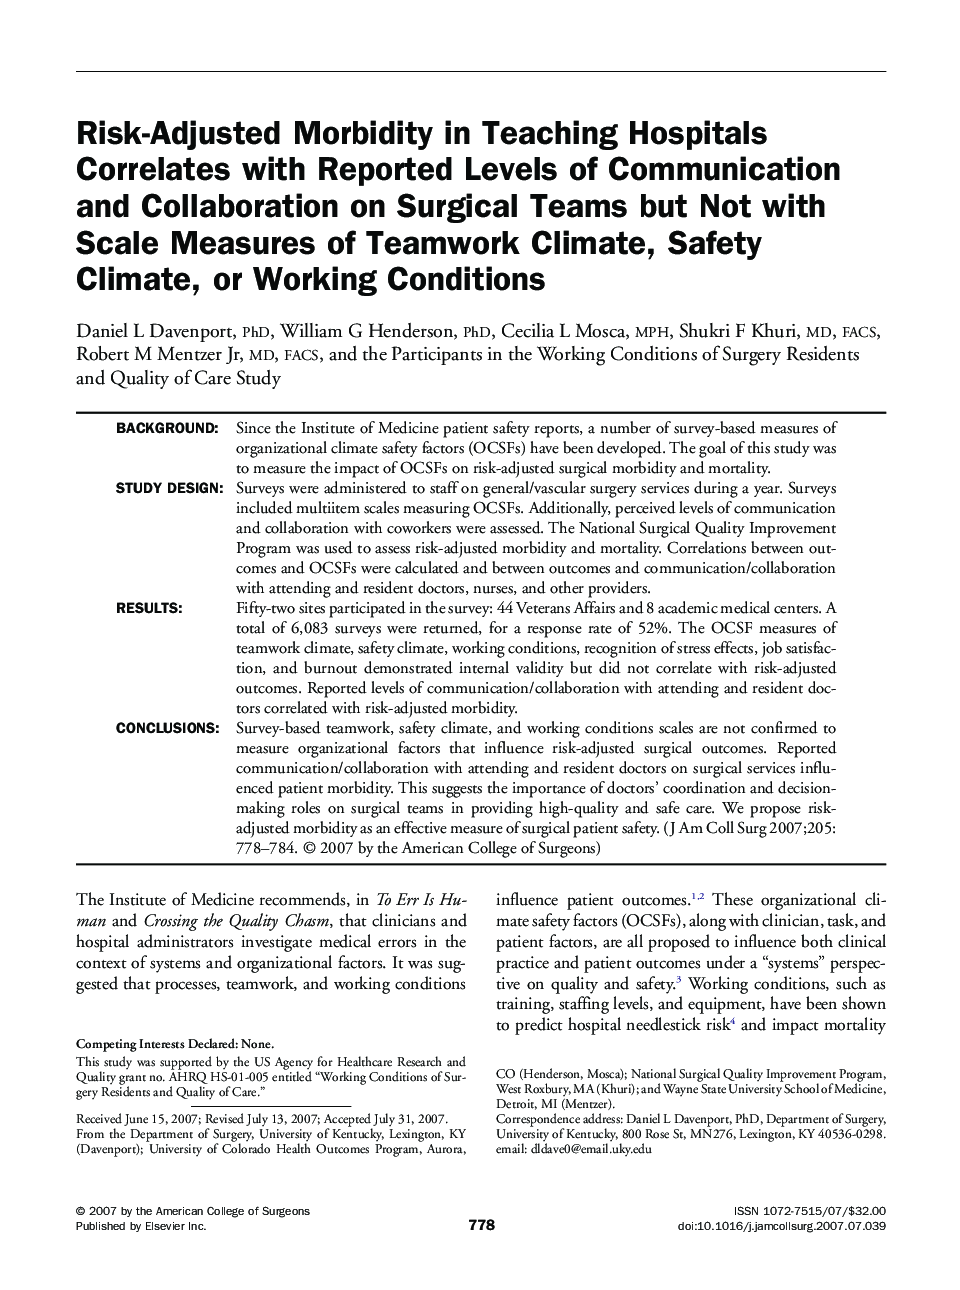 Risk-Adjusted Morbidity in Teaching Hospitals Correlates with Reported Levels of Communication and Collaboration on Surgical Teams but Not with Scale Measures of Teamwork Climate, Safety Climate, or Working Conditions 